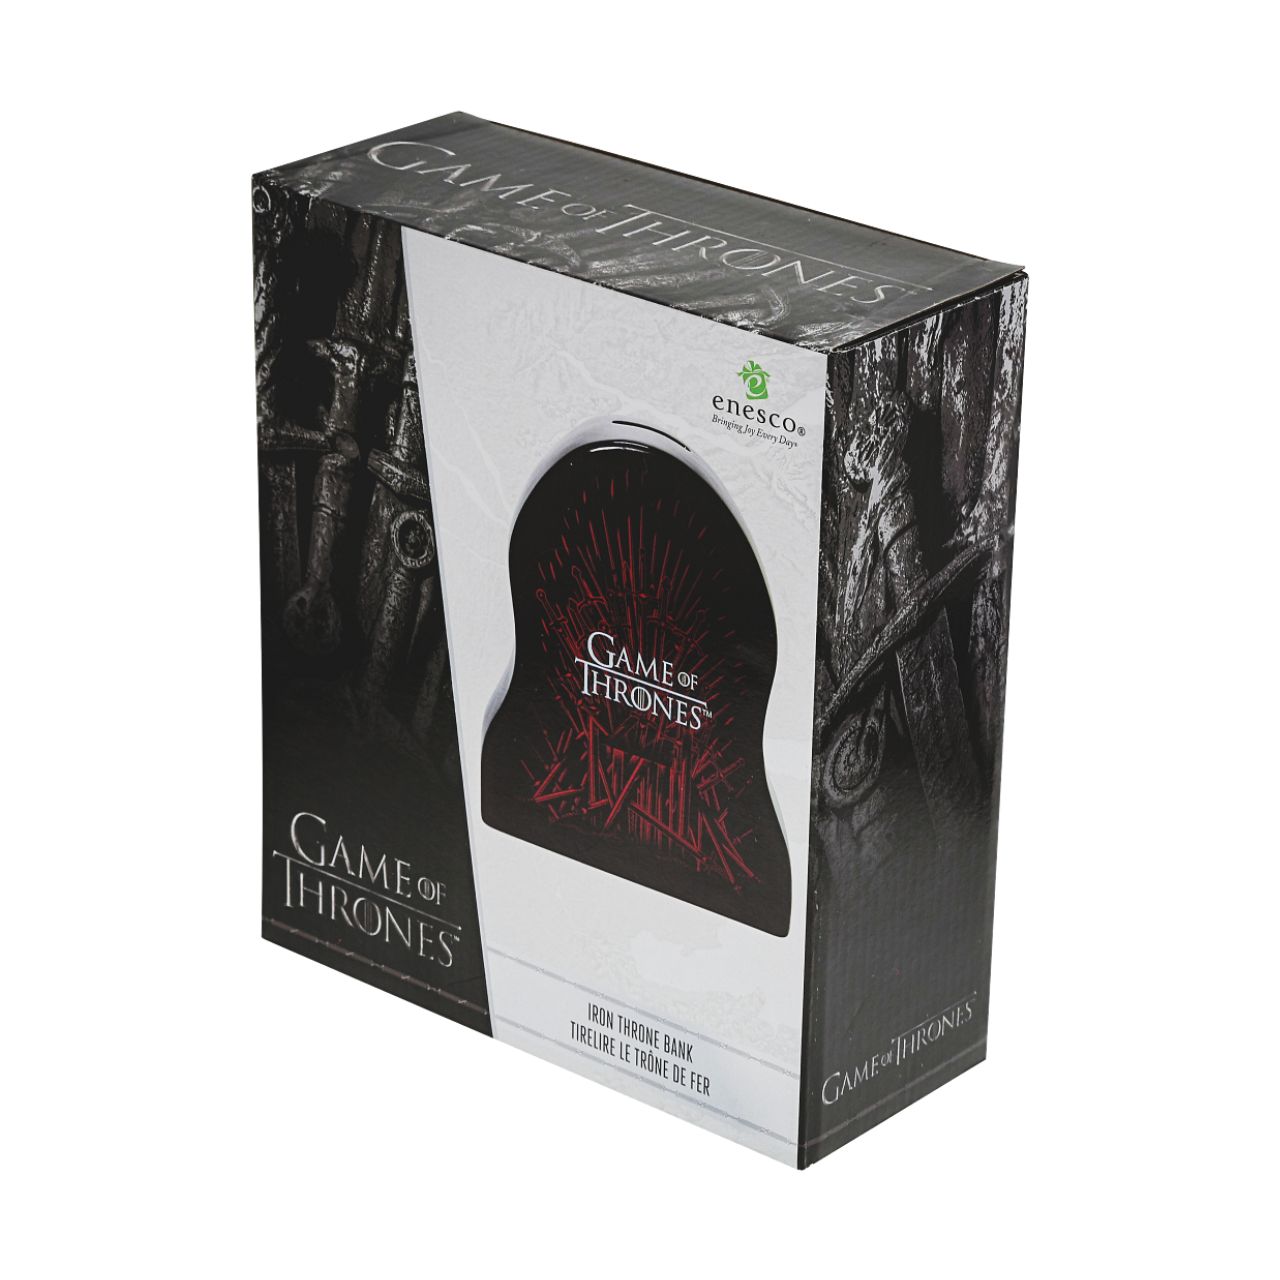 Department 56 Game of Thrones Iron Throne Ceramic Money Bank  The Iron Bank will have its due… The Iron Bank may be the safest place for your money in Game of Thrones, but this ceramic bank is the next best thing for us. Featuring the iconic Iron Throne in black and red, with a glazed finish and minimalist shape, this is the perfect gift for anyone who is a Game of Thrones fan.